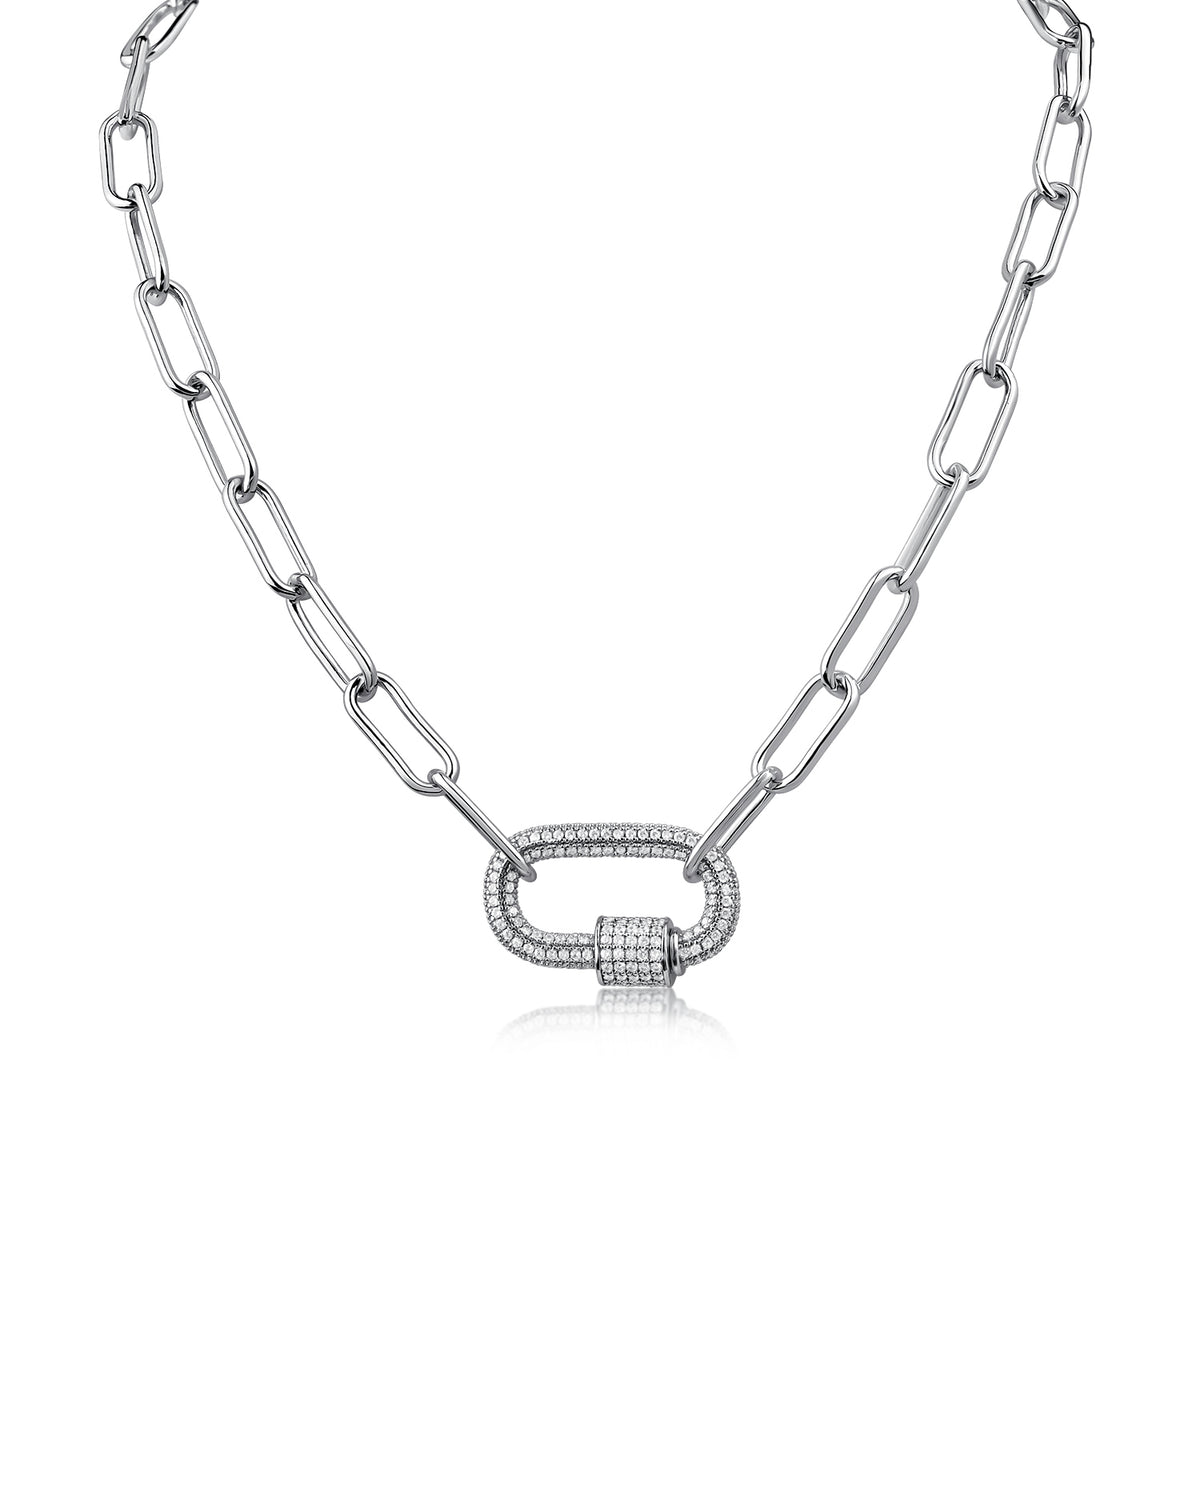 Pave Oval Chain Necklace